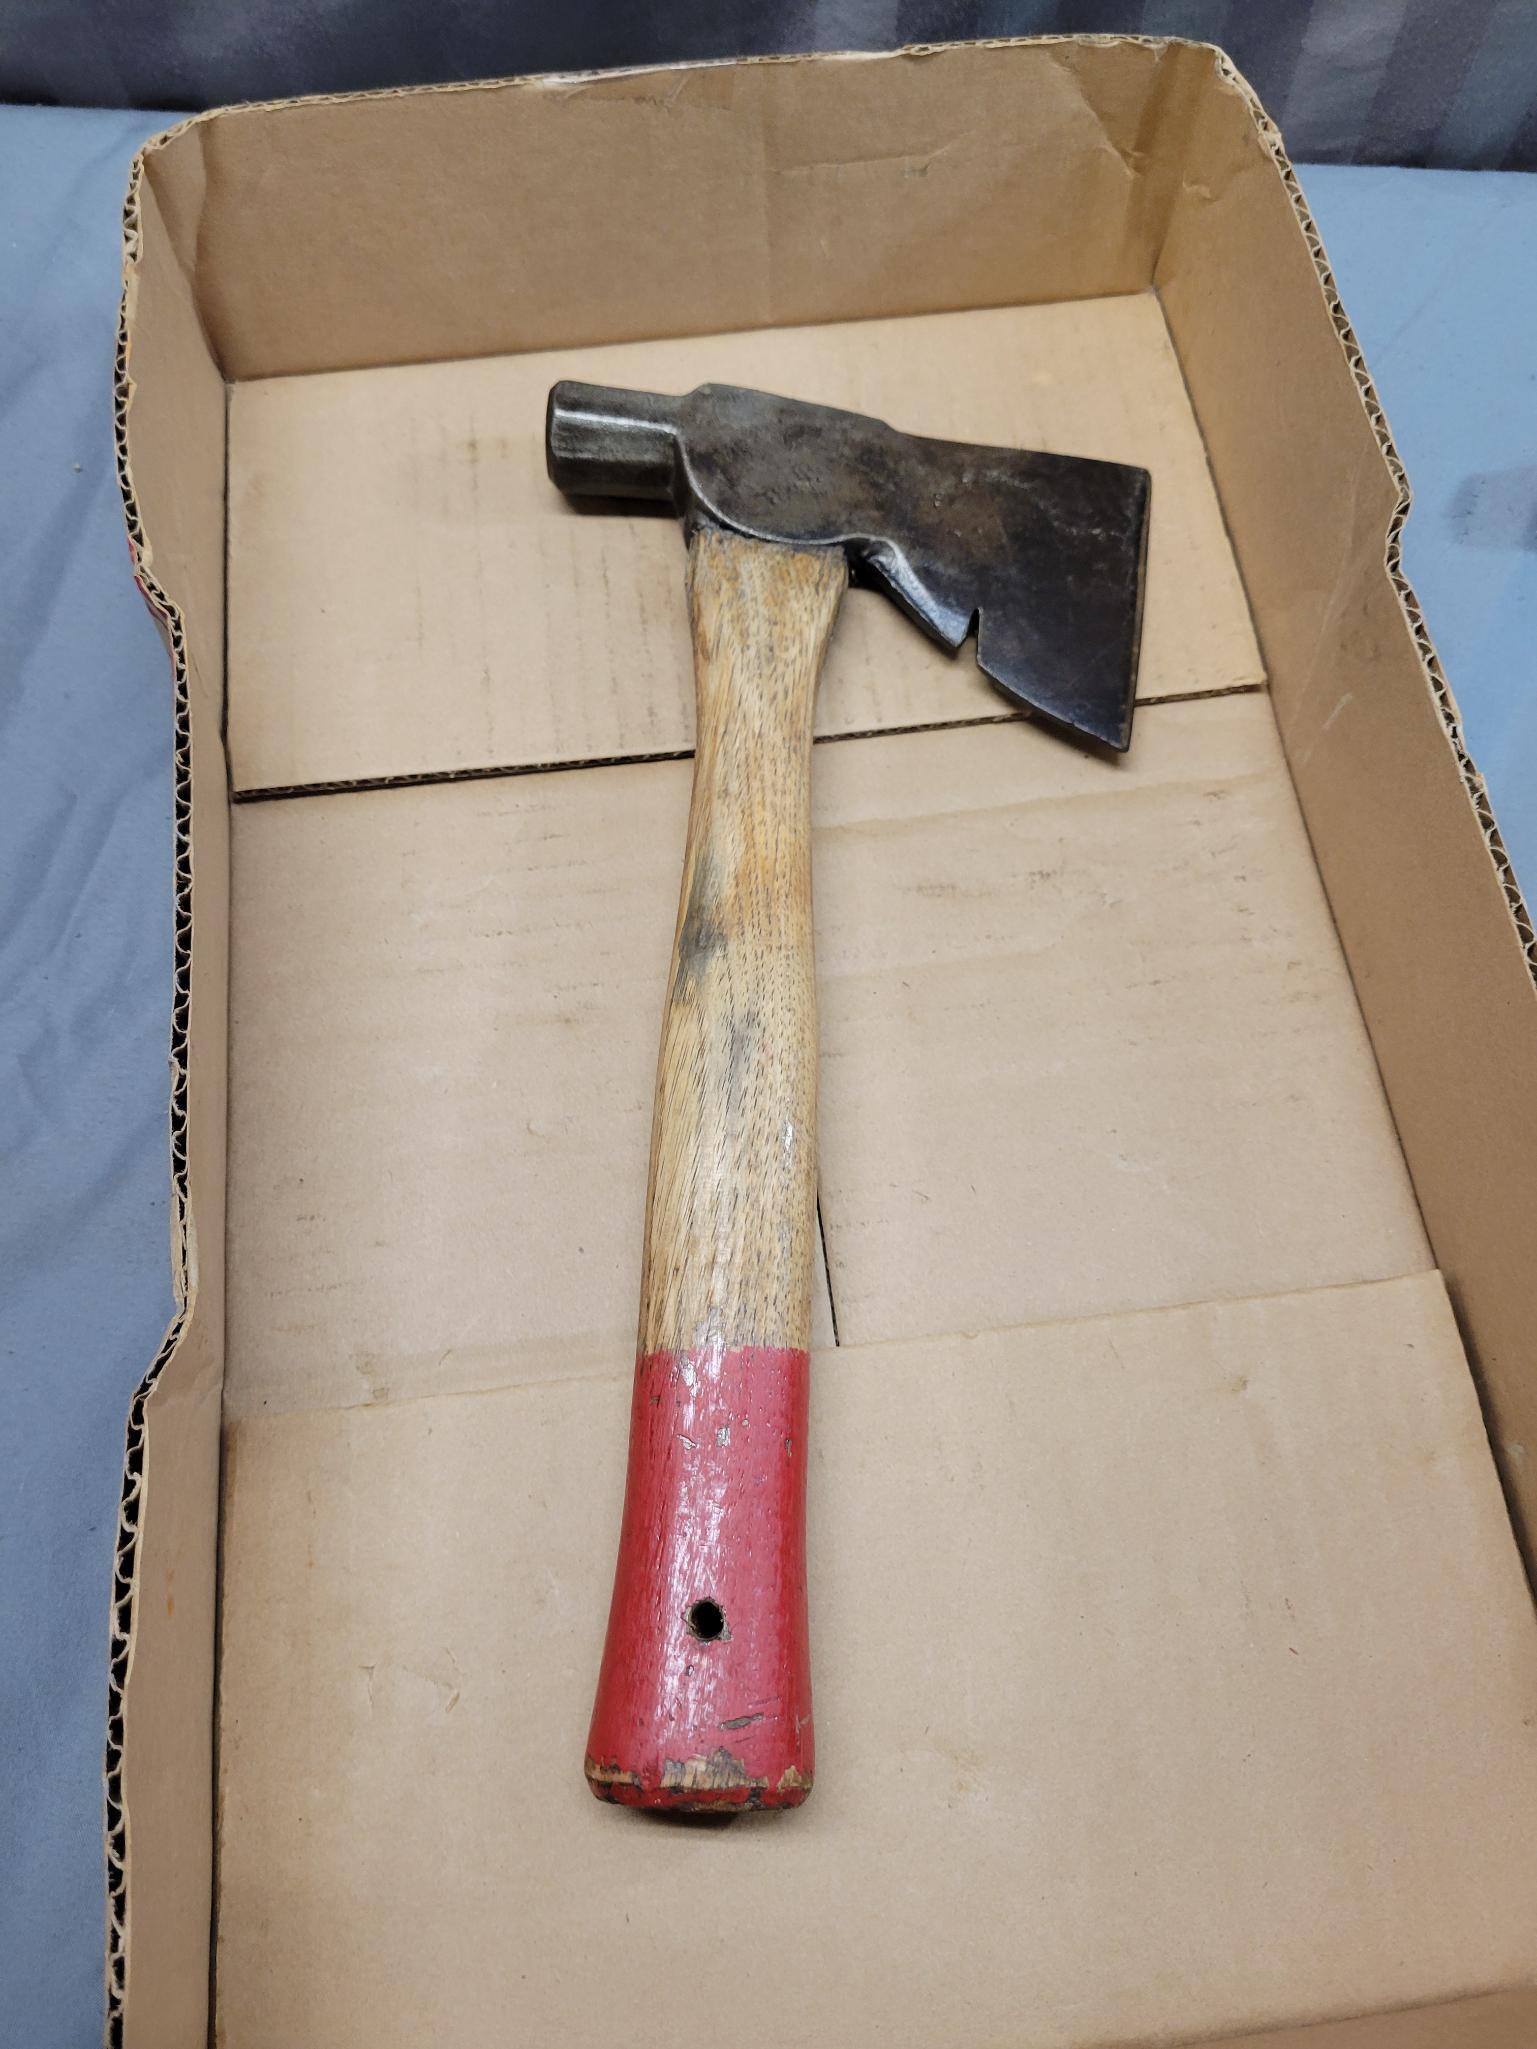 3 Hammer Hatchets, one Kelly Axe, one True Temper, and one unmarked that has been repaired